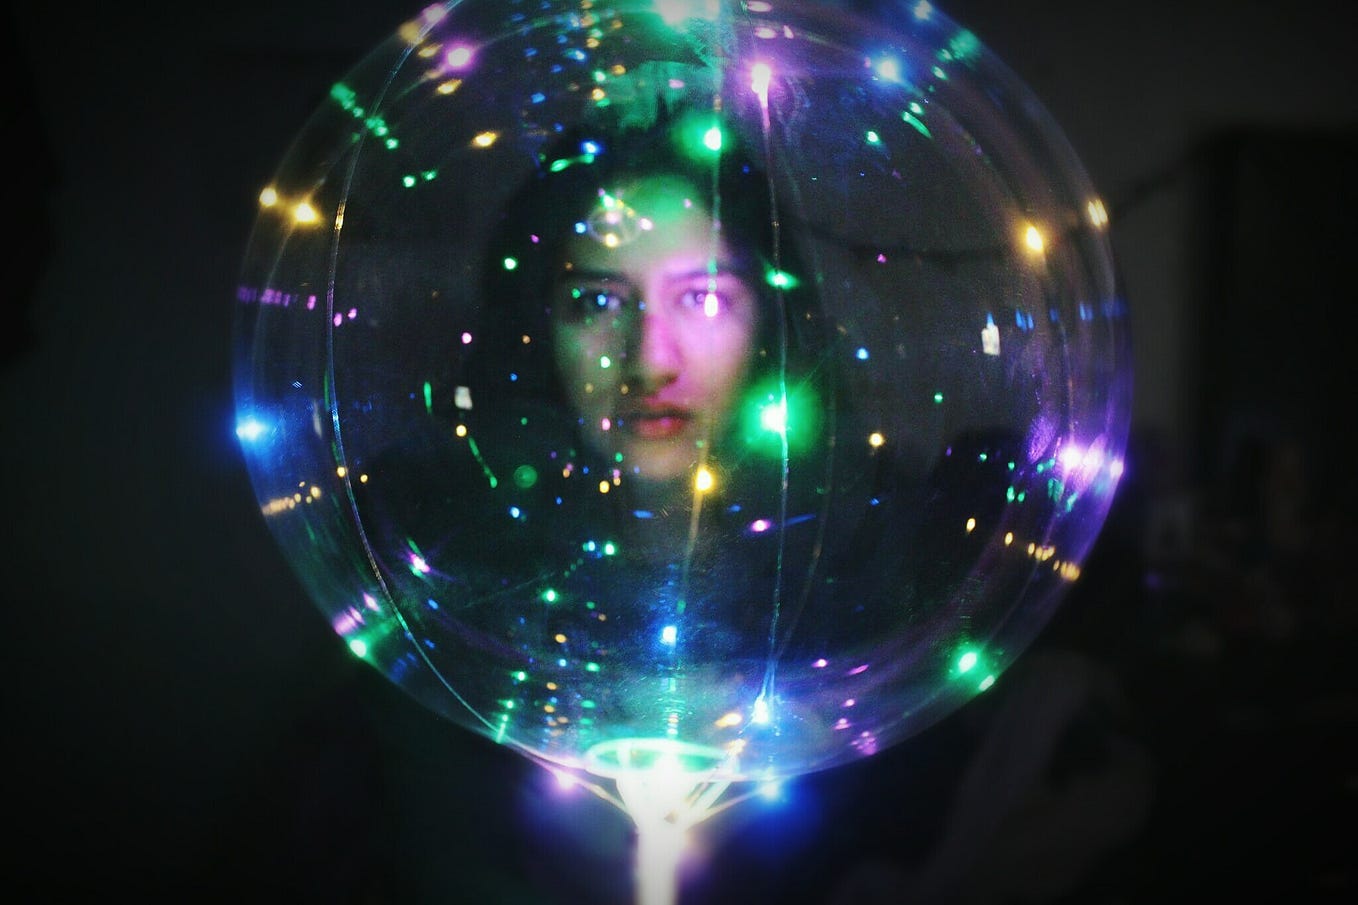 A photo of a woman with an illuminated transparent ball in a dark room.